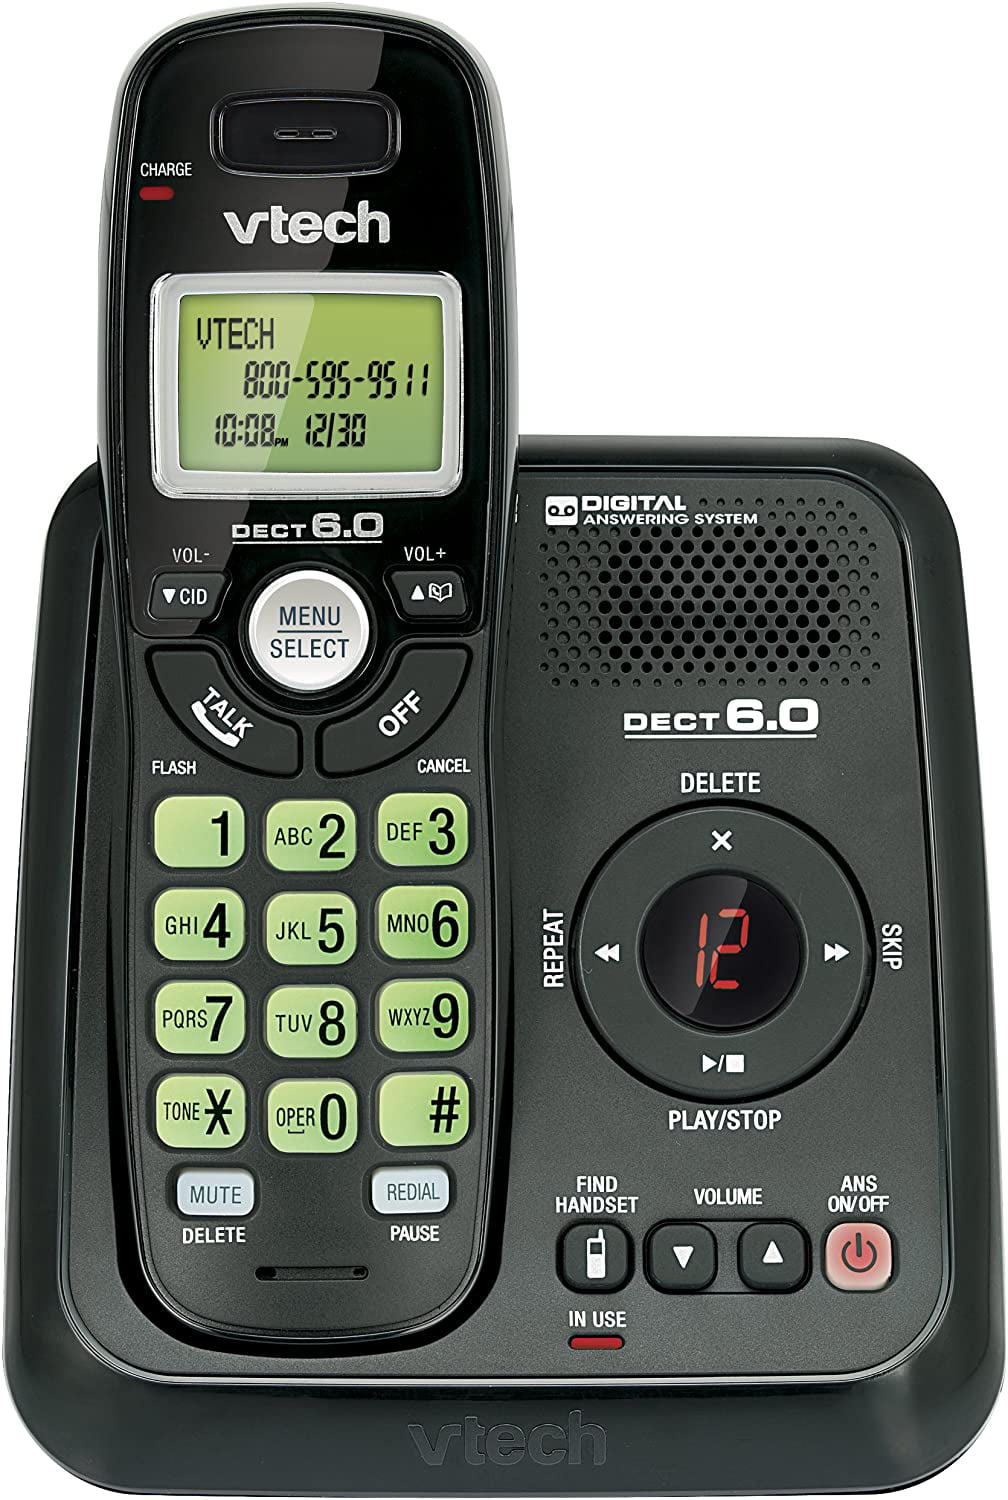 Vtech Dect 6 0 Single Handset Cordless Phone System With Digital